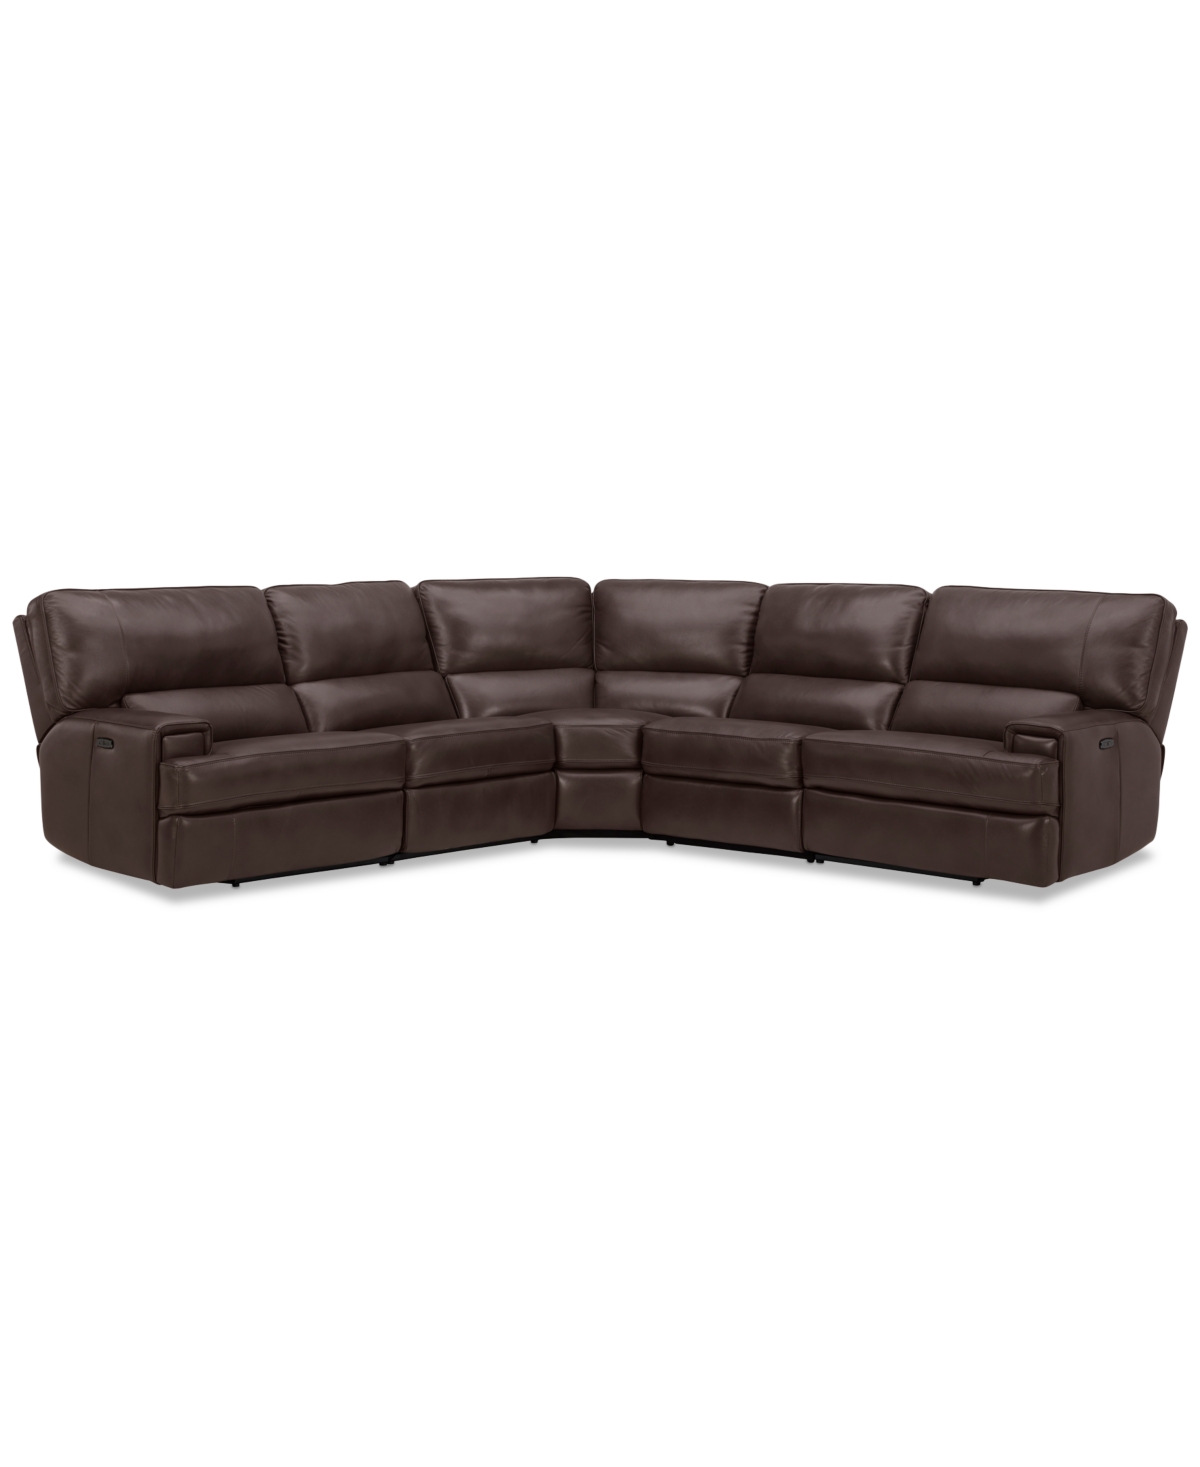 Furniture Binardo 123" 5 Pc Zero Gravity Leather Sectional With 2 Power Recliners, Created For Macy's In Walnut